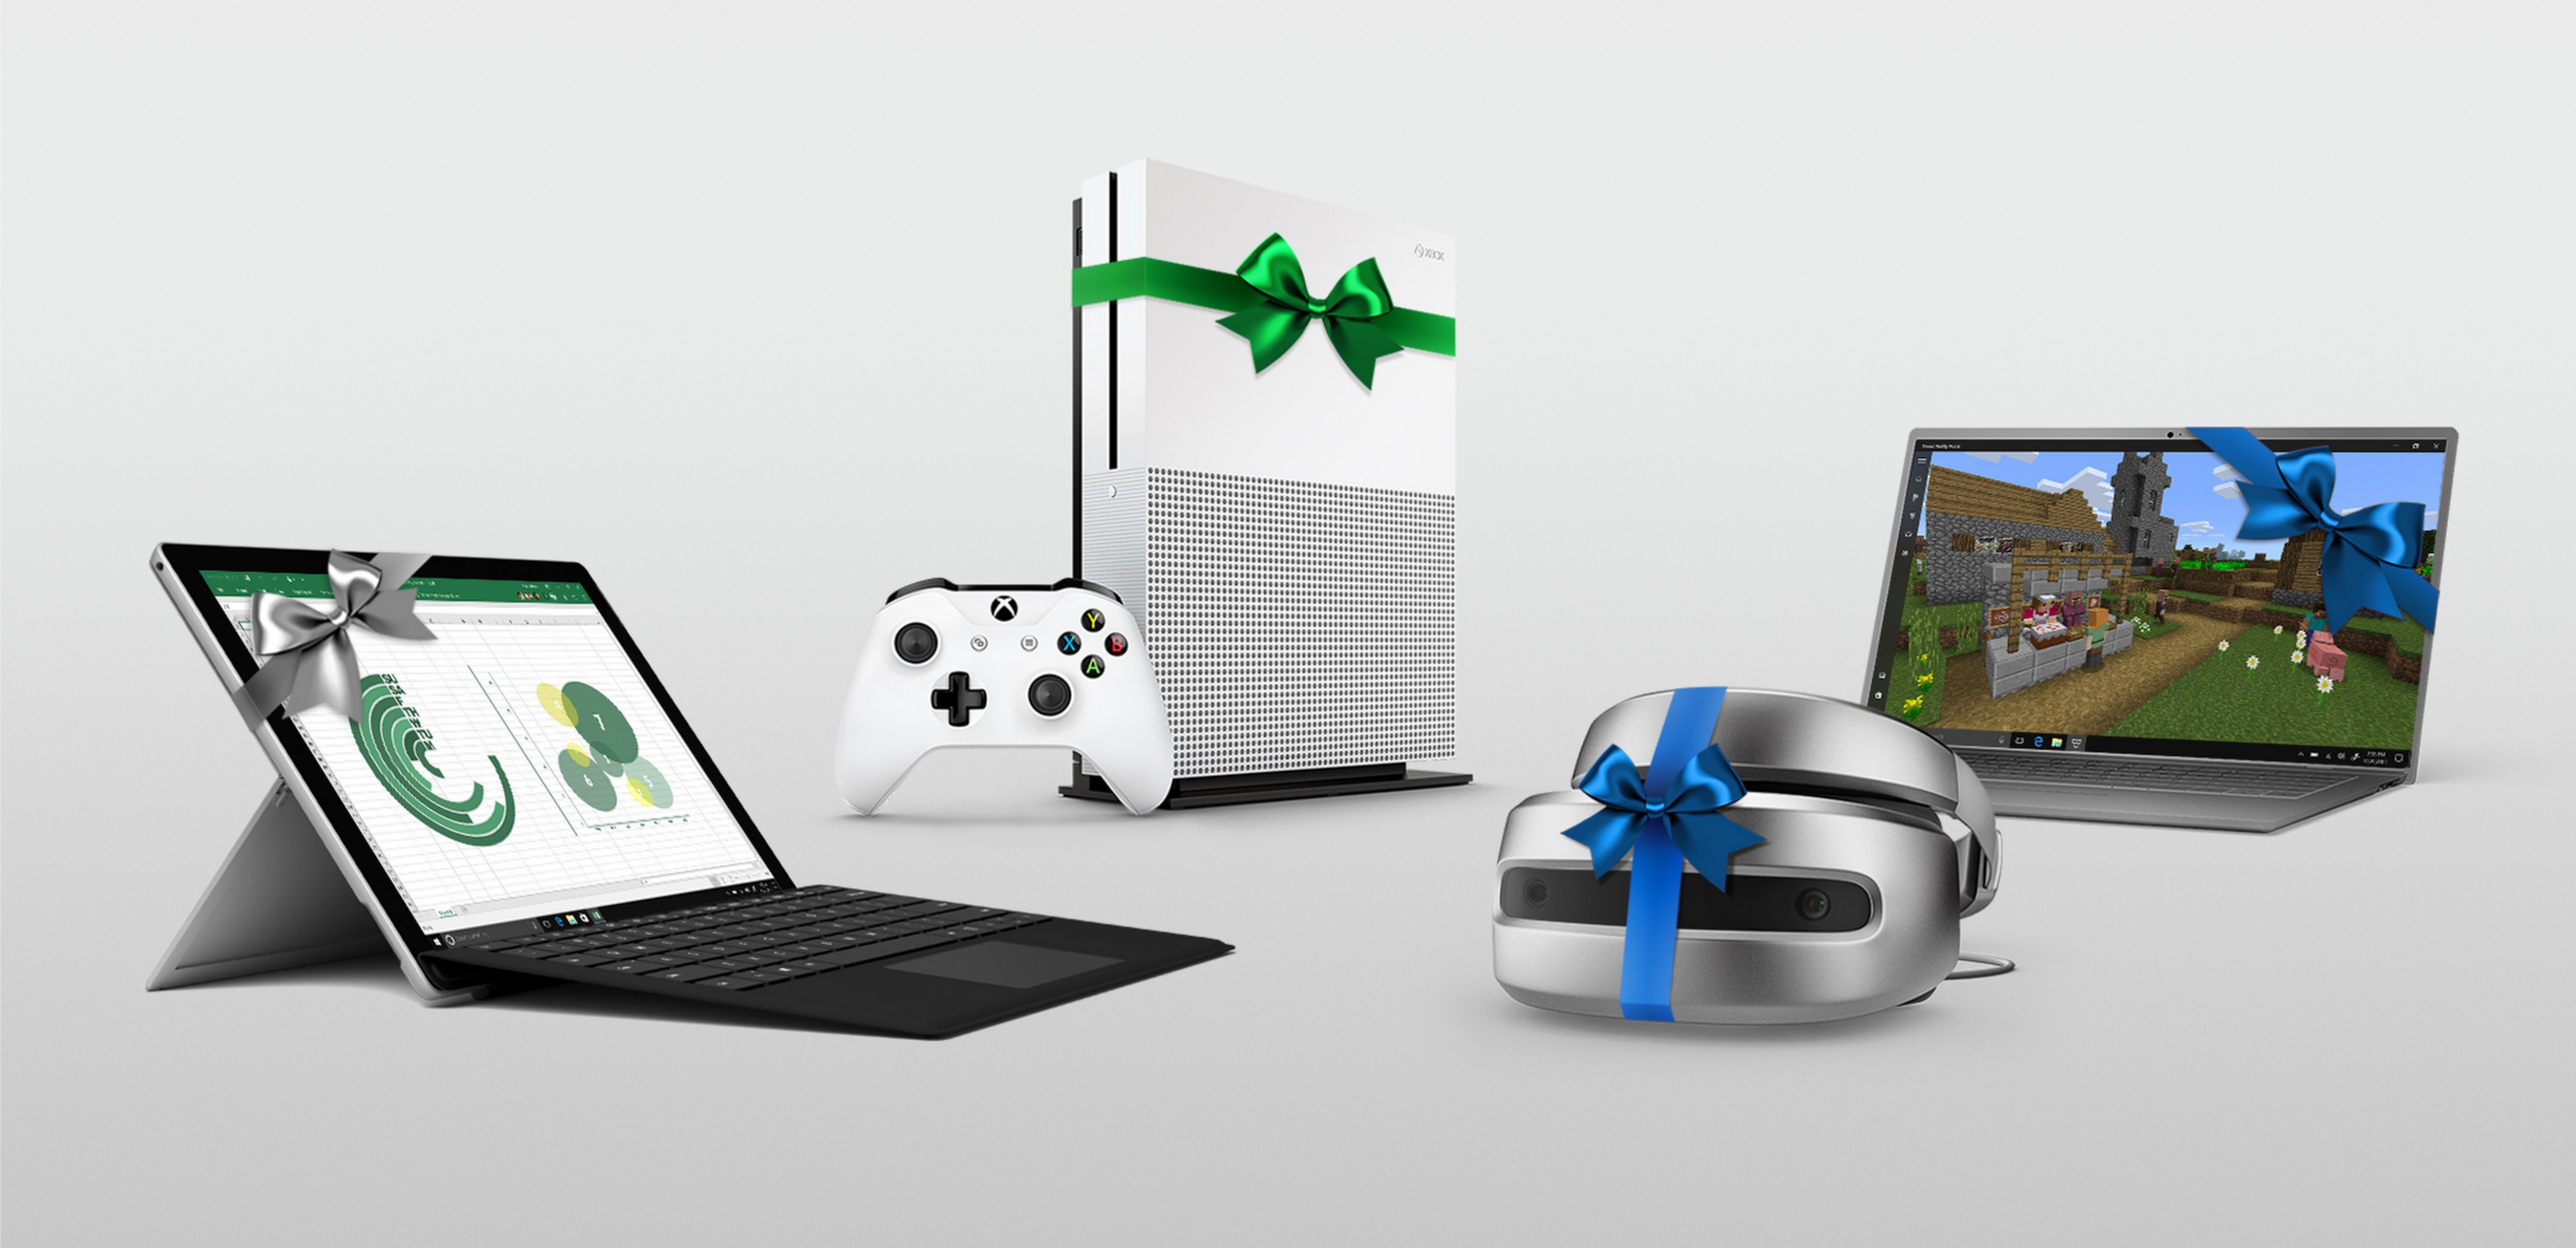 Announcing The Top Black Friday Deals From Microsoft And Our